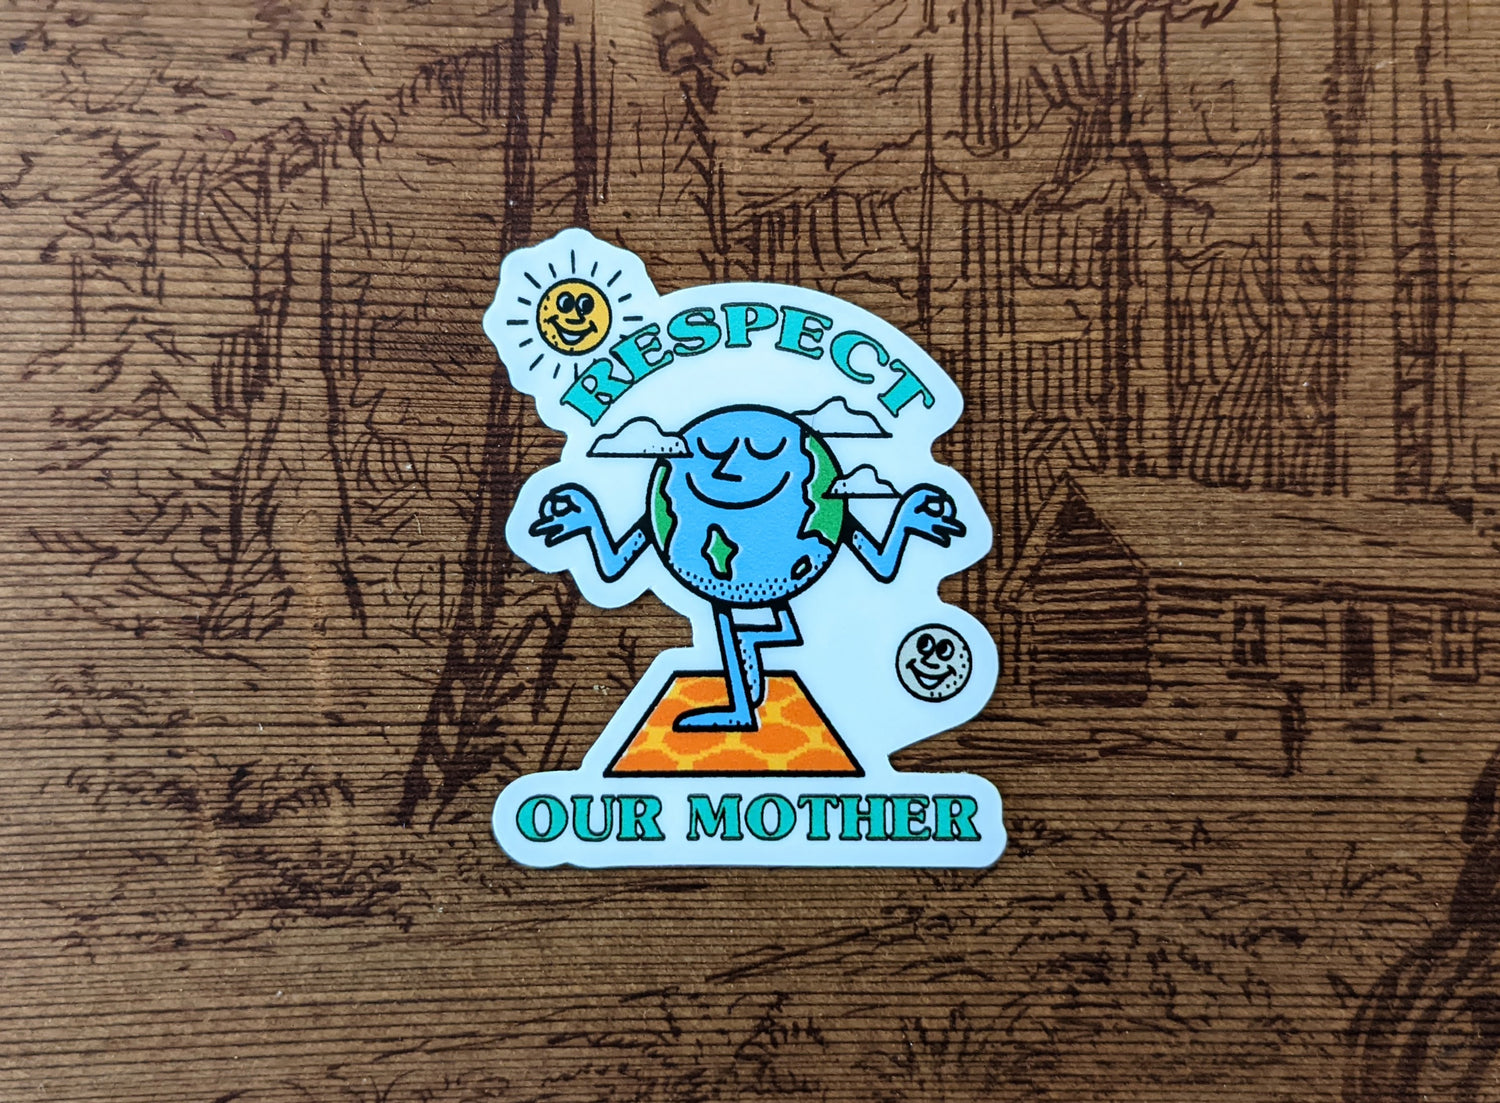 Respect our Mother sticker with peaceful Earth, Sun and Moon